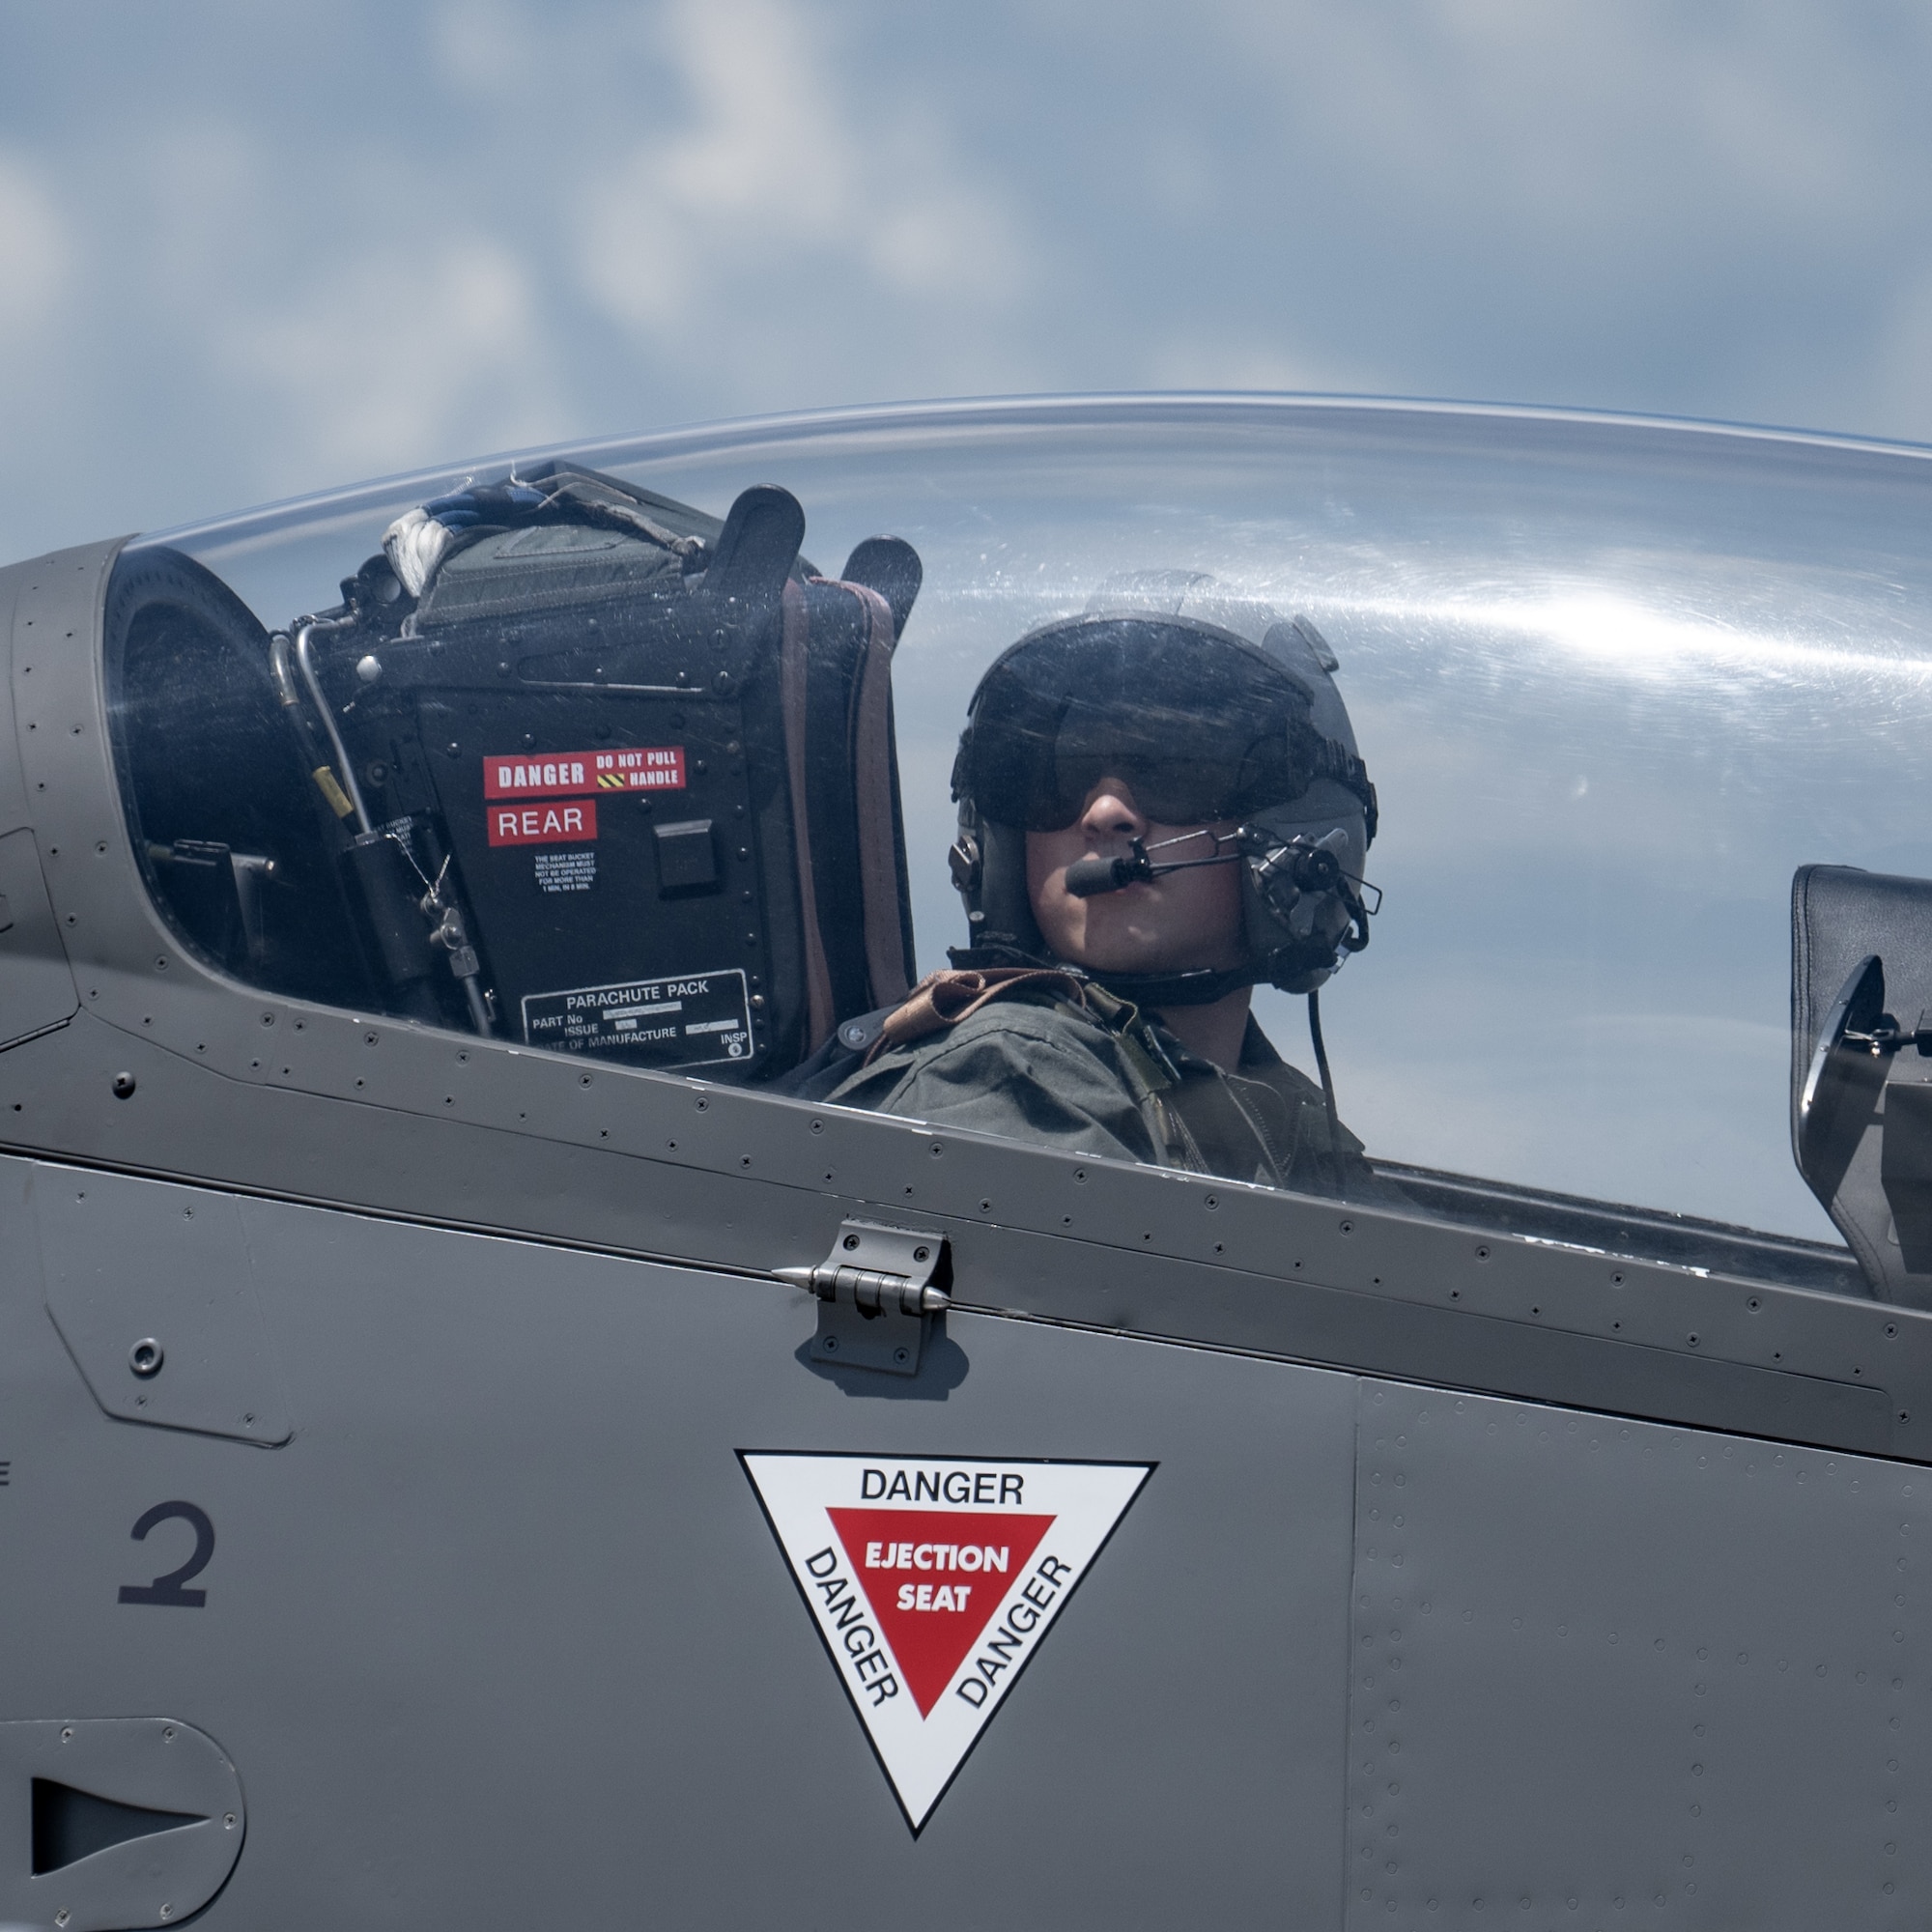 Throughout the Summer, up to 450 Cadets engaged in this year’s Air Force ROTC Field Training will be able to have incentive flights in EMB-312s (A-27) Tucano aircraft.